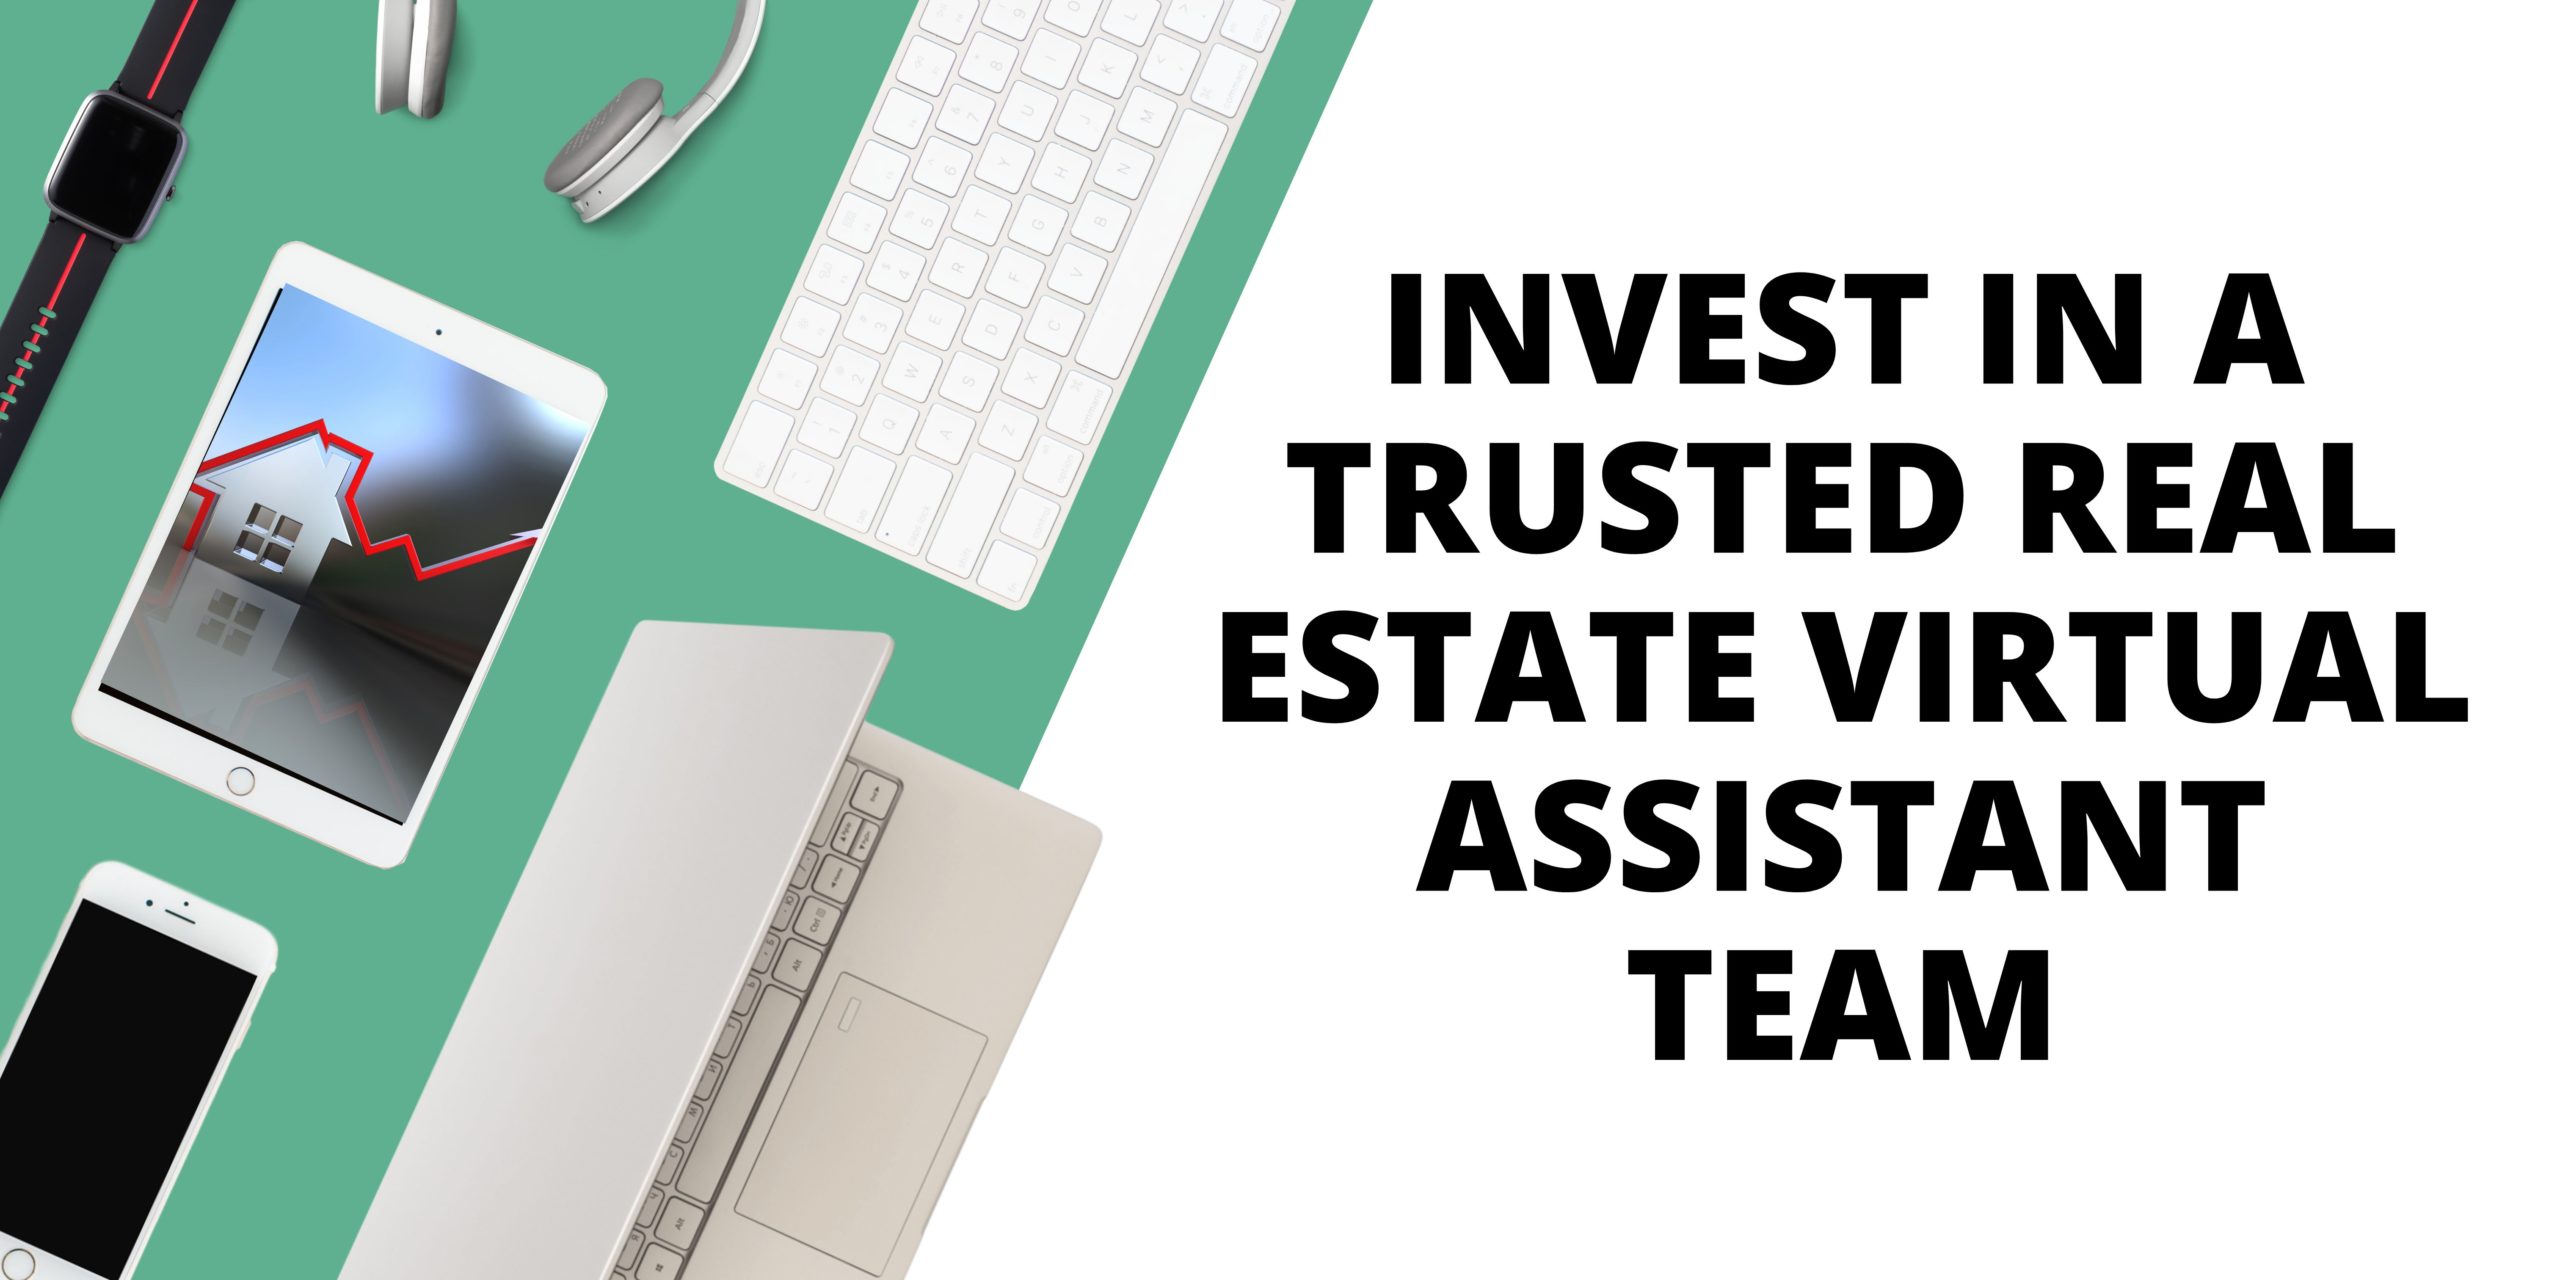 Invest in a Trusted Real Estate Virtual Assistant Team